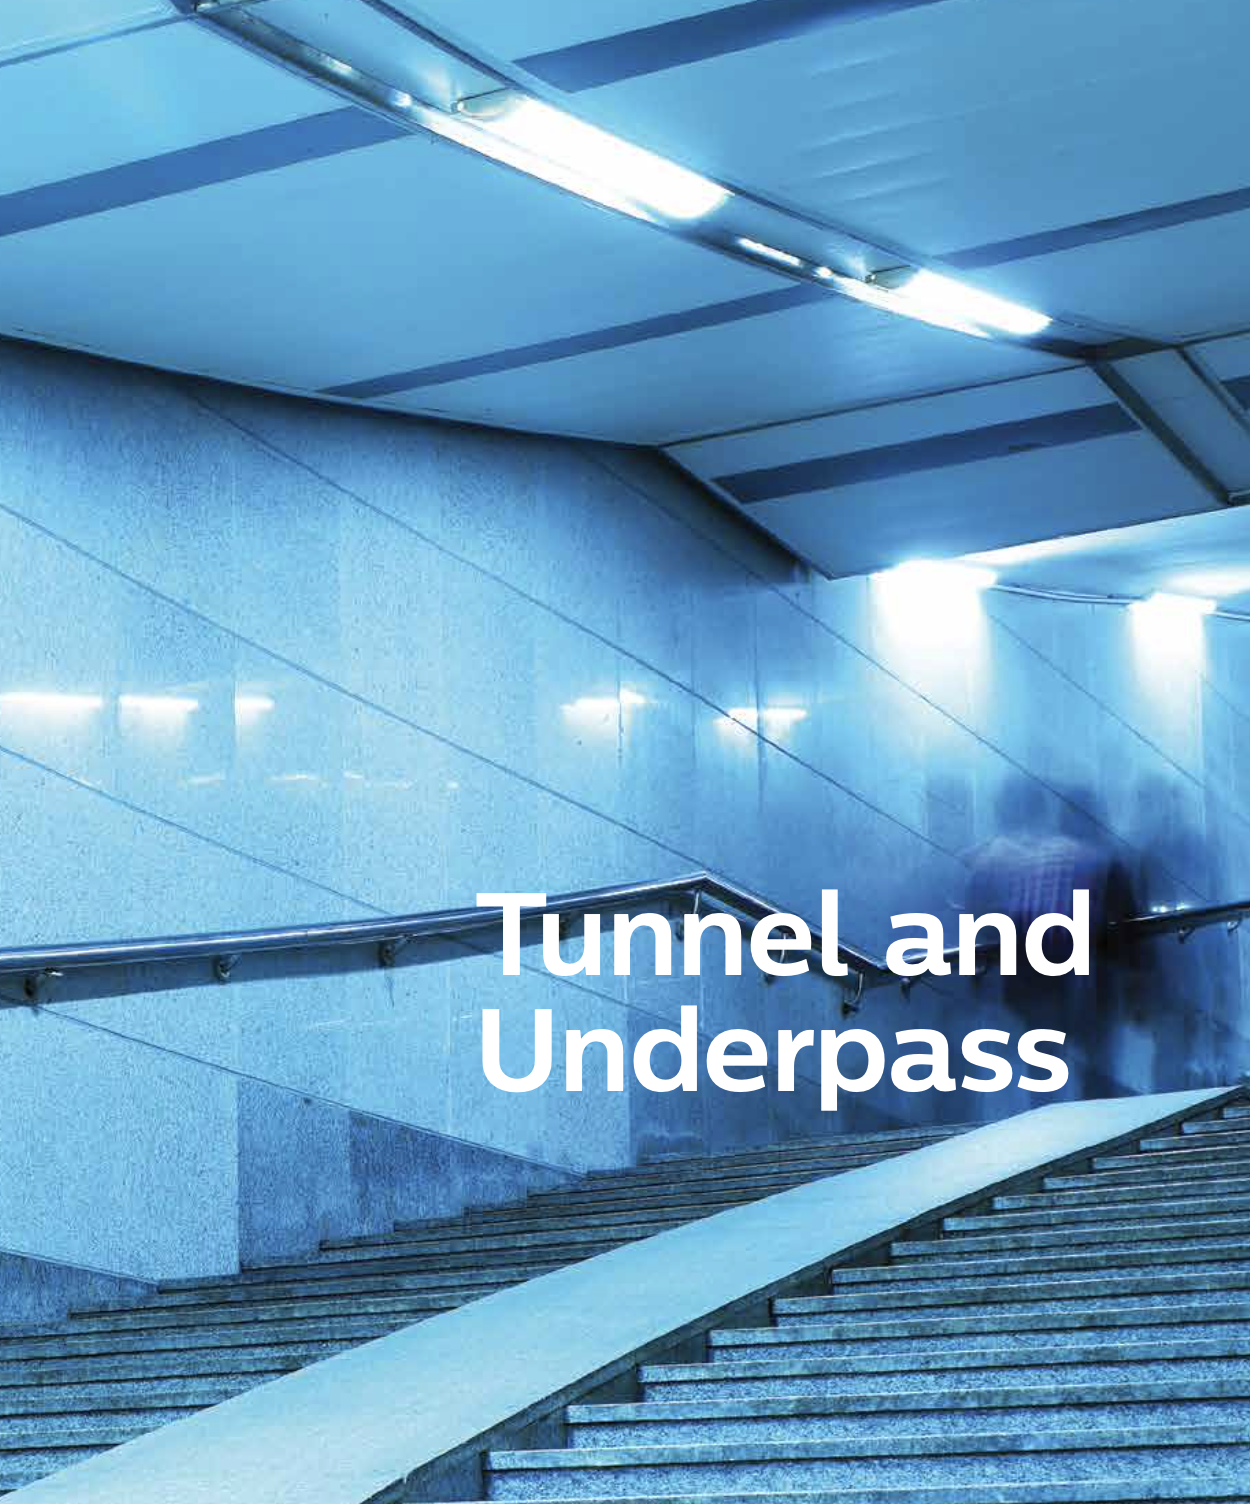 Philips Tunnel and Underpass